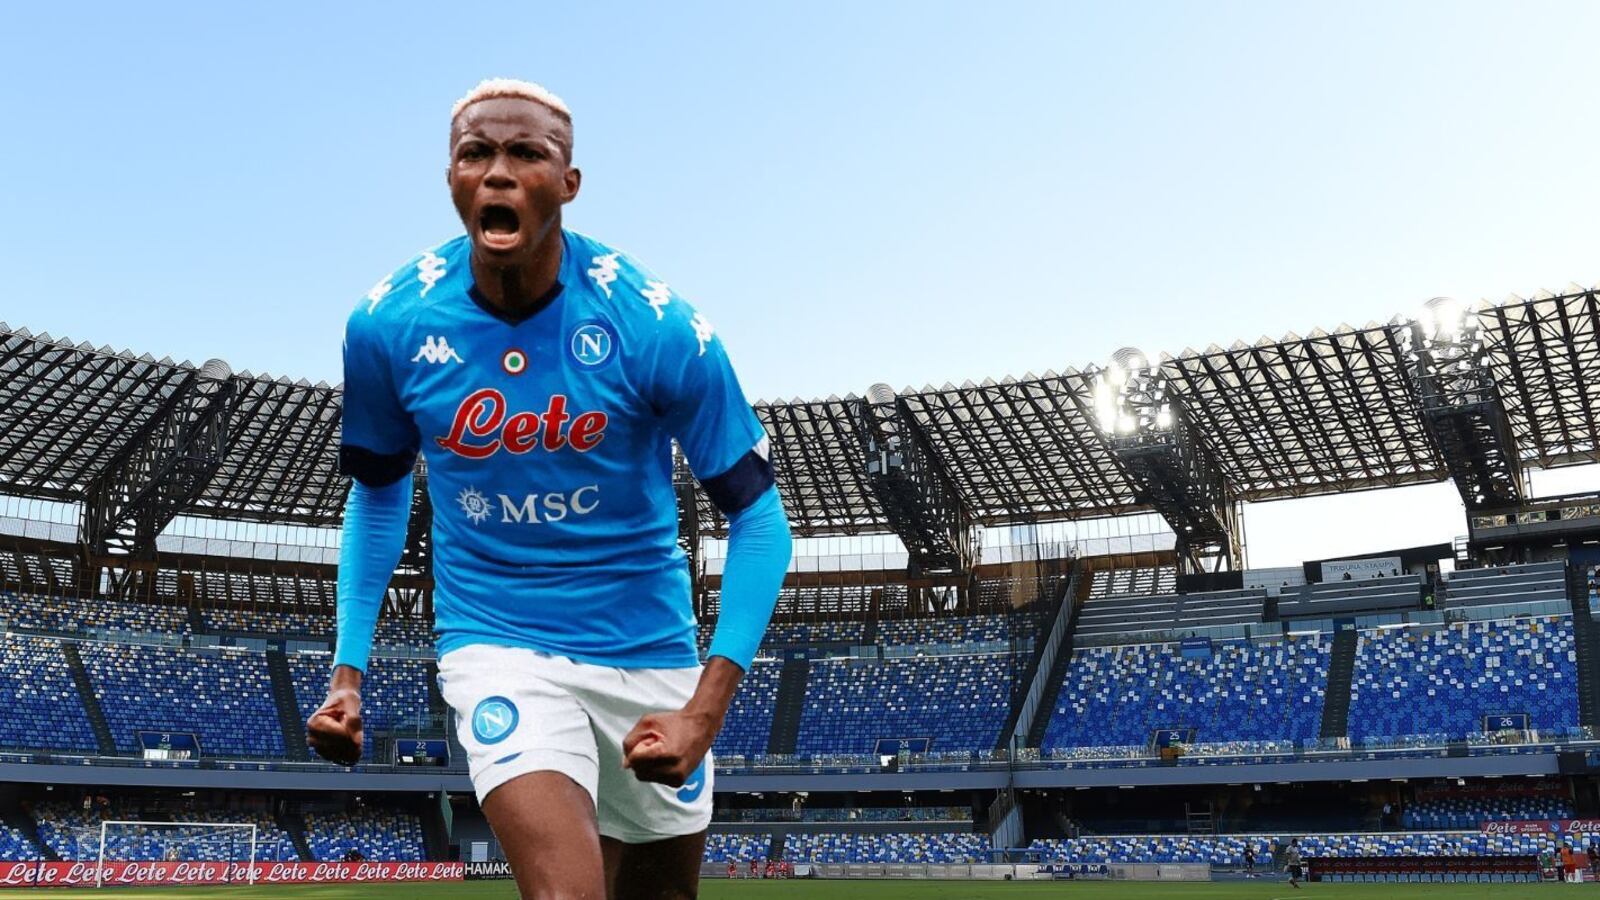 The price that Napoli has put on Osimhen after offers from various clubs